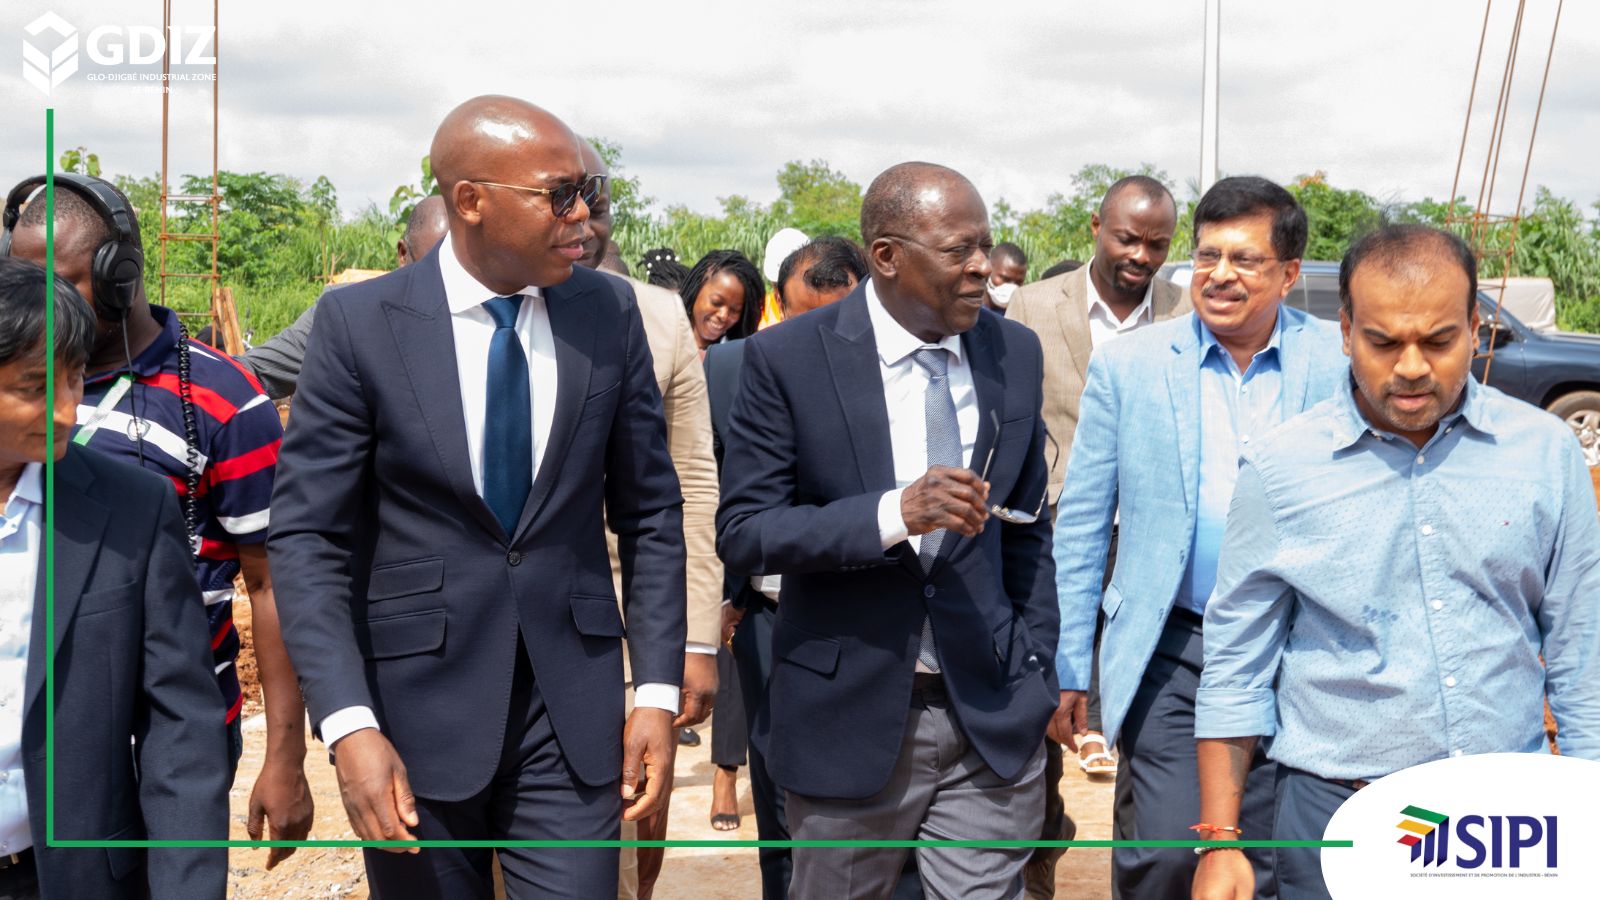 On 29 June 2022, GDIZ received Mr Abdoulaye Bio Tchané, Benin's Minister of State for Development and Coordination of Government Action, for a working session.